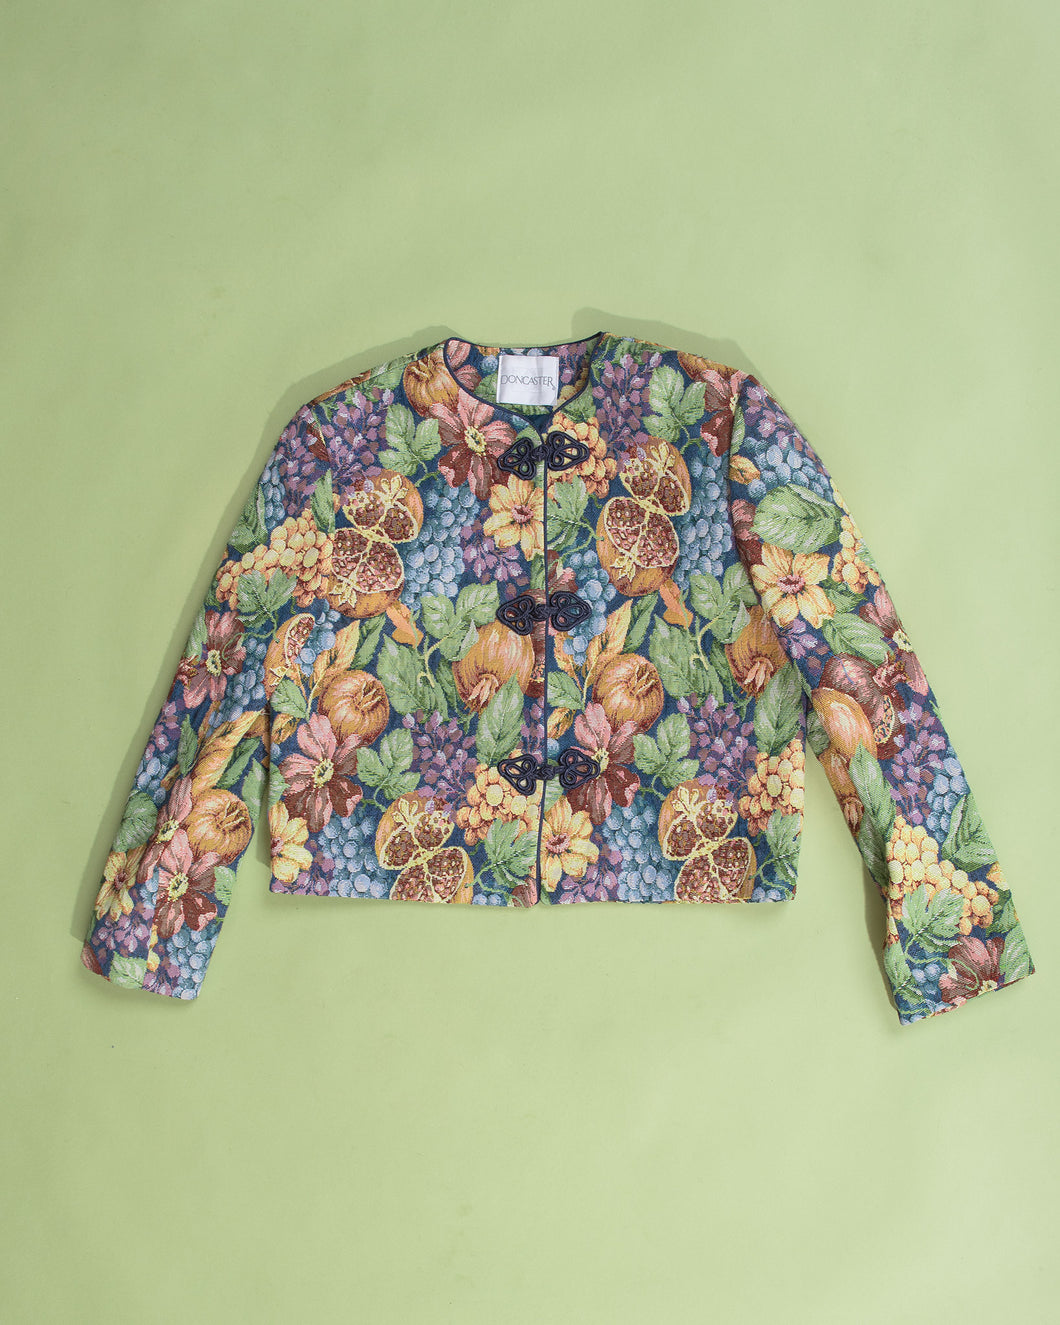 80s Fruit Tapestry Cropped Jacket